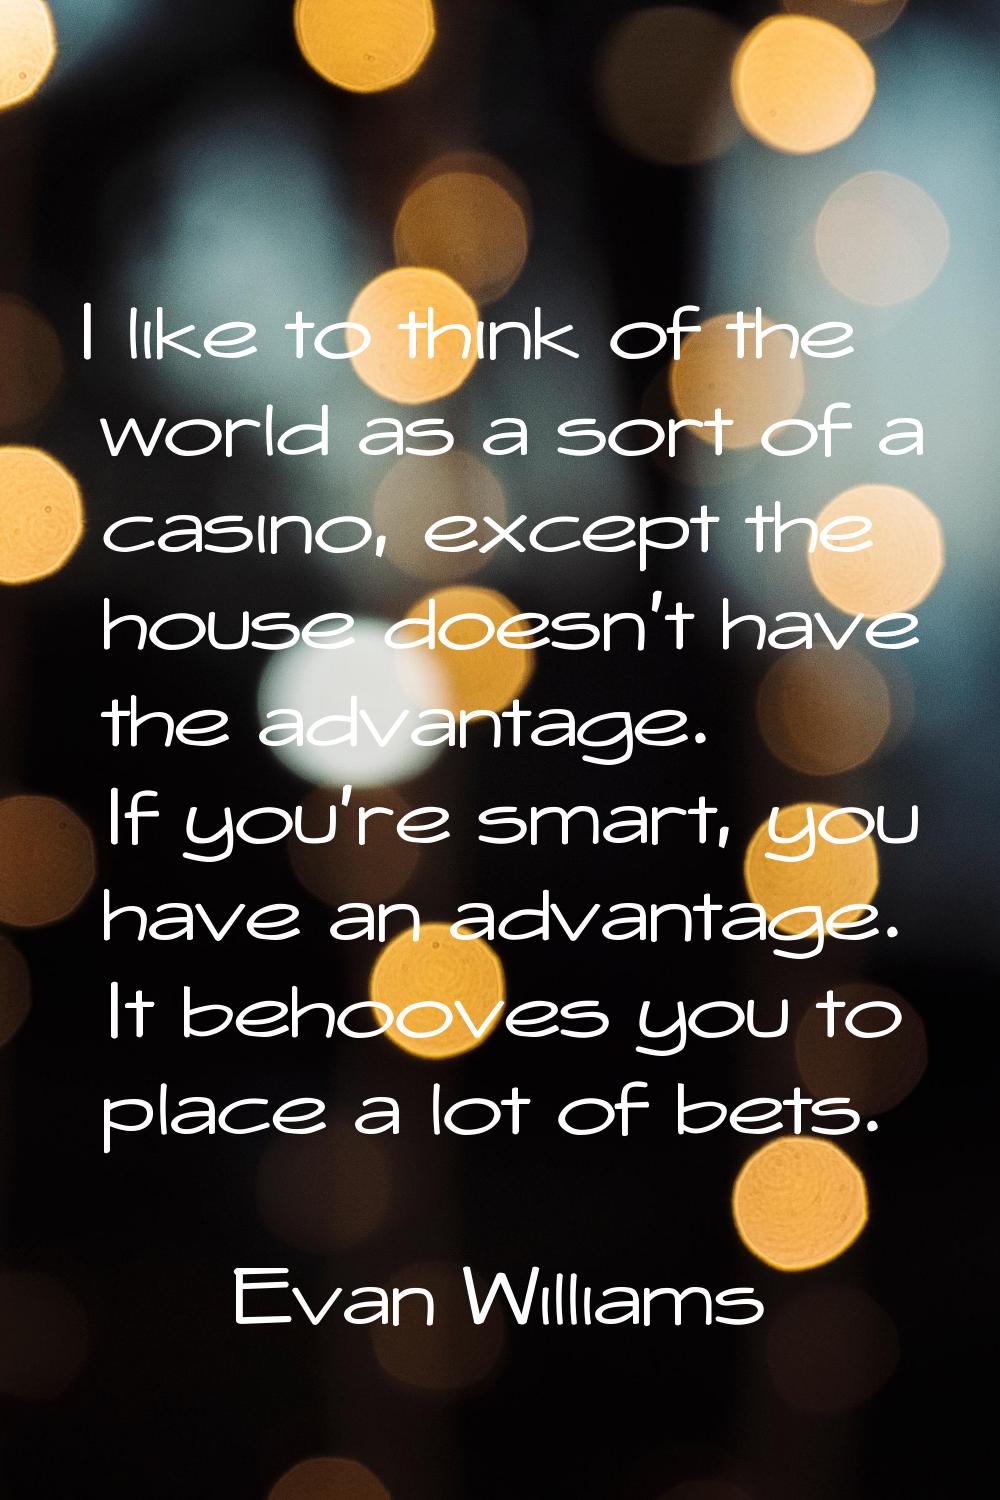 I like to think of the world as a sort of a casino, except the house doesn't have the advantage. If